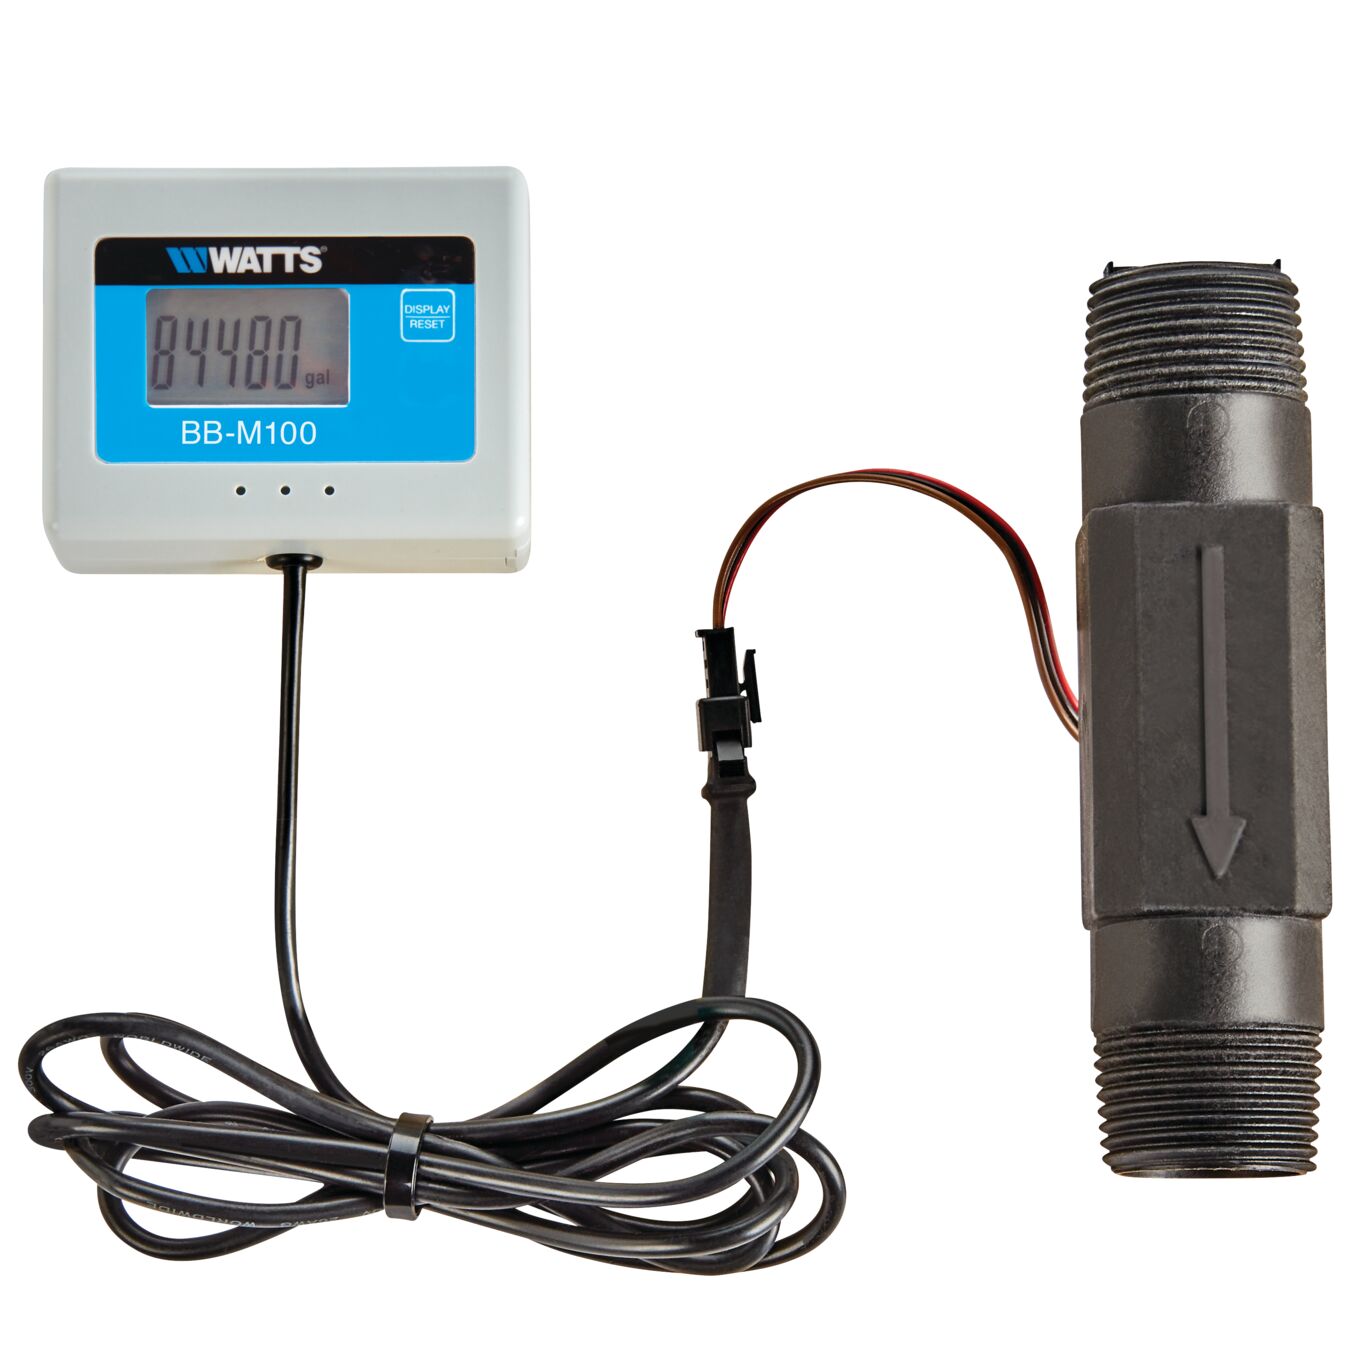 Product Image - BB-M100 Flow Monitor and Flow Meter (Vertical)